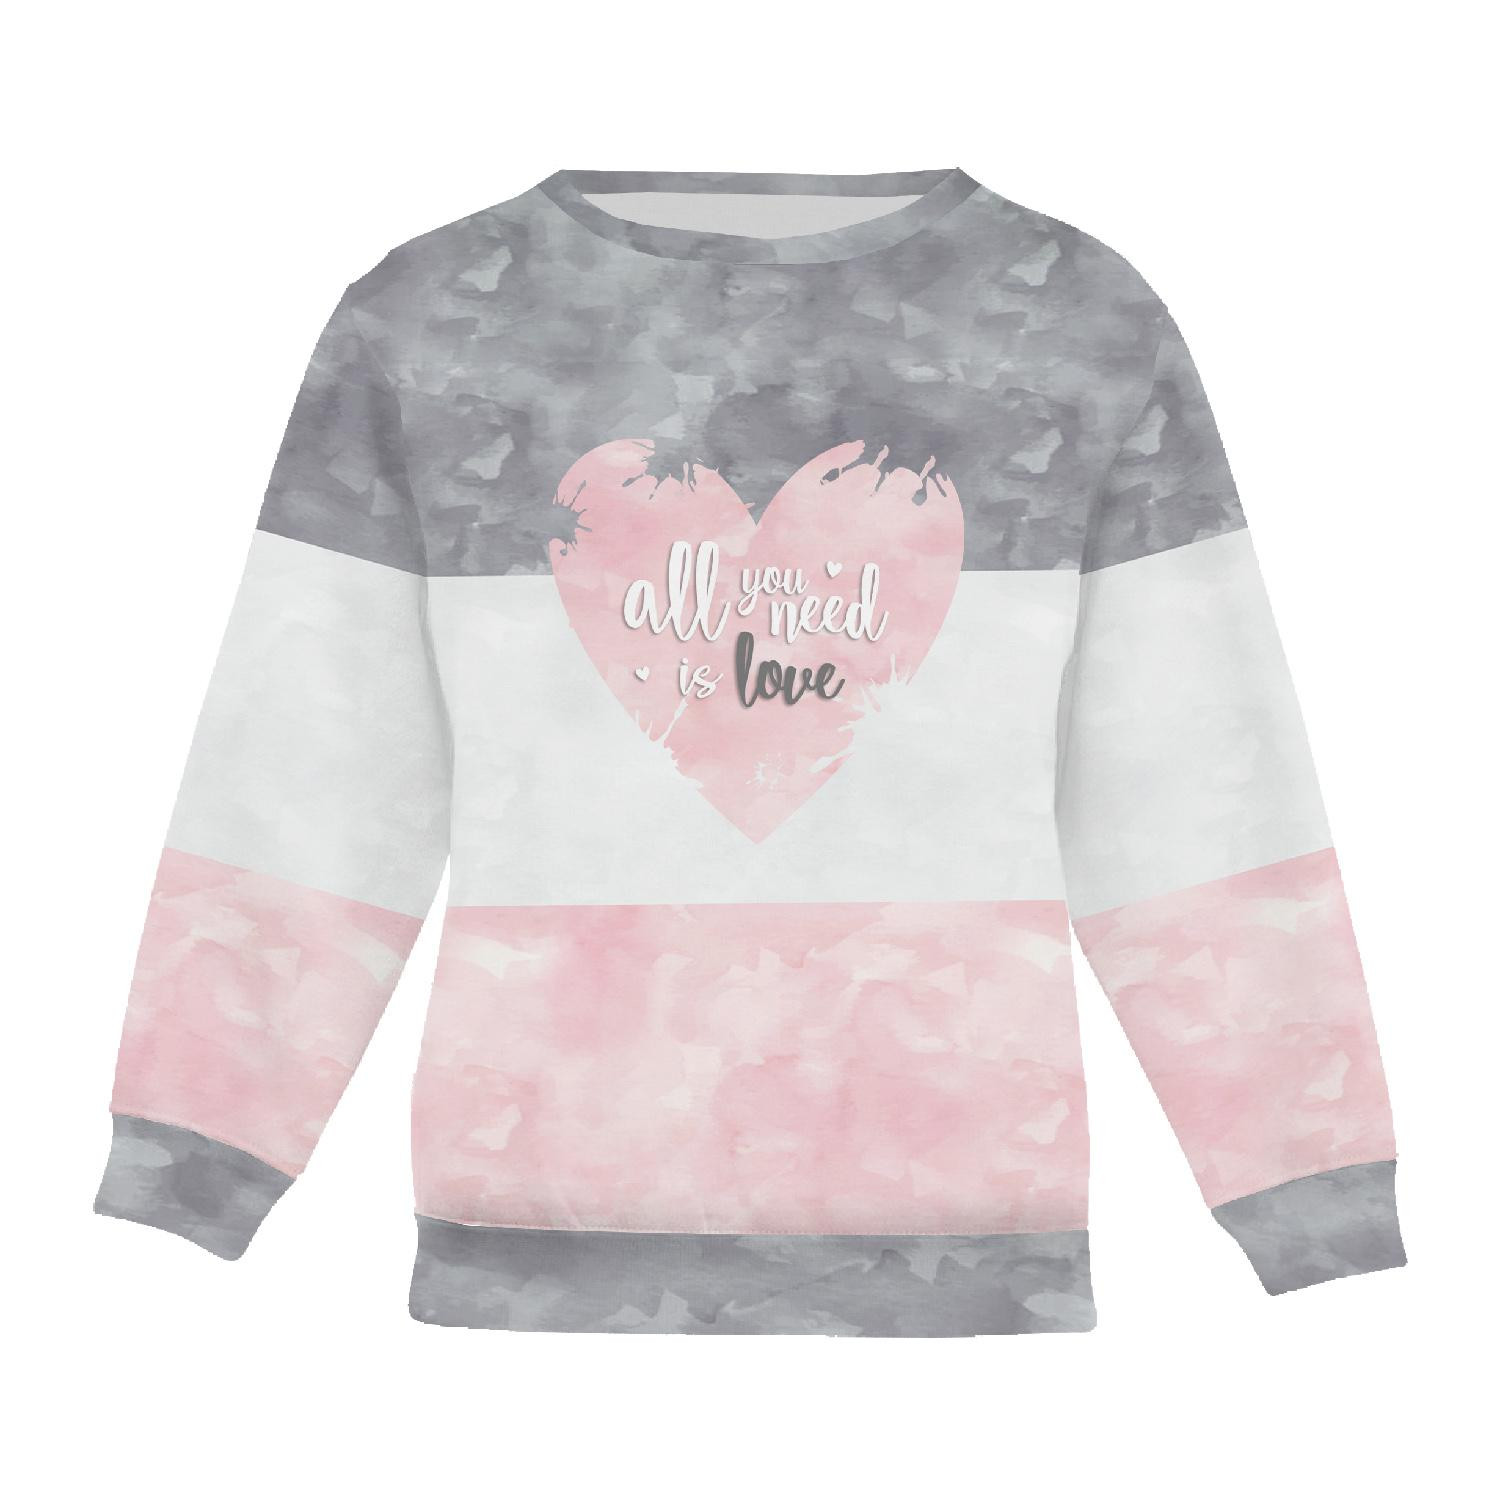 Children's tracksuit (MILAN) - ALL YOU NEED IS LOVE / STRIPES - sewing set